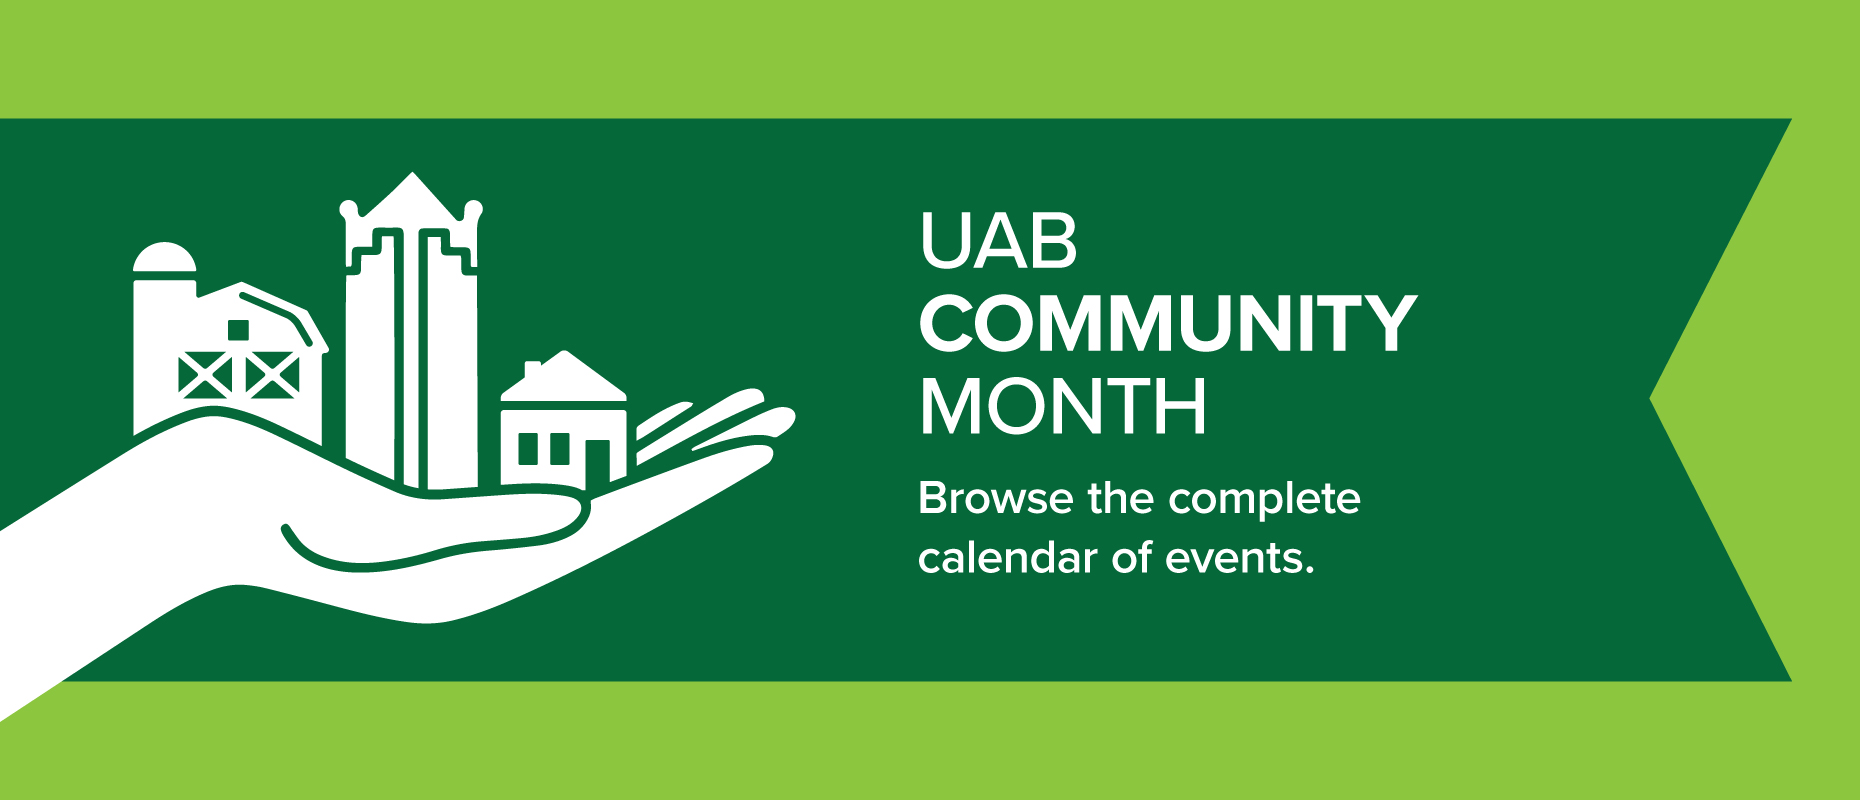 UAB Community Month: Browse the complete calendar of events